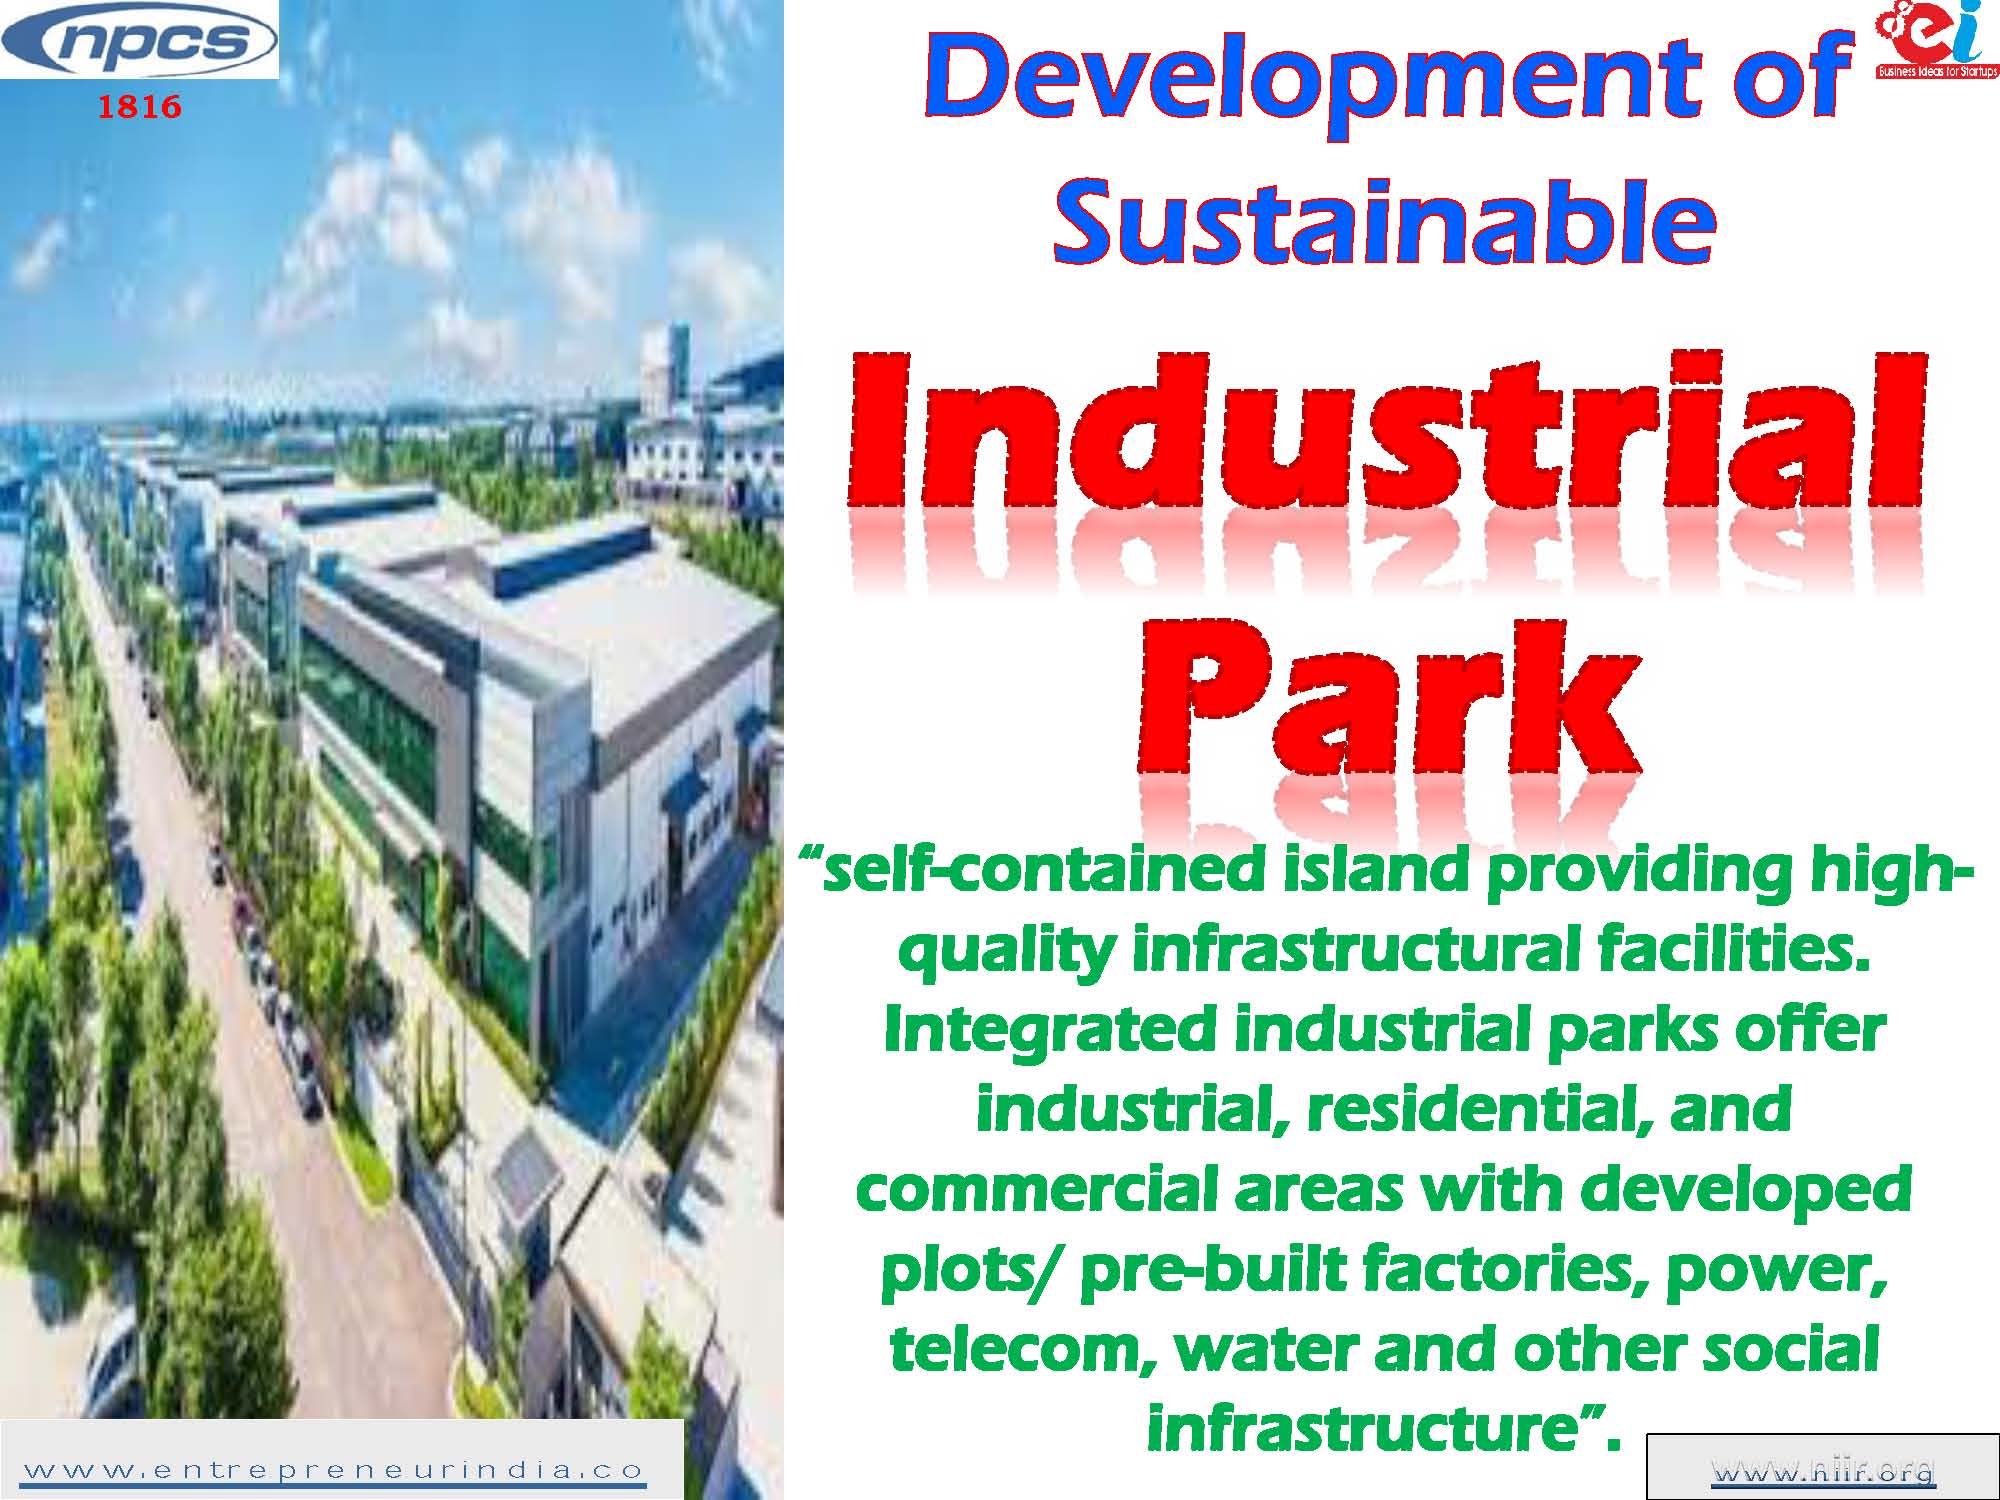 Development of Sustainable Industrial Park